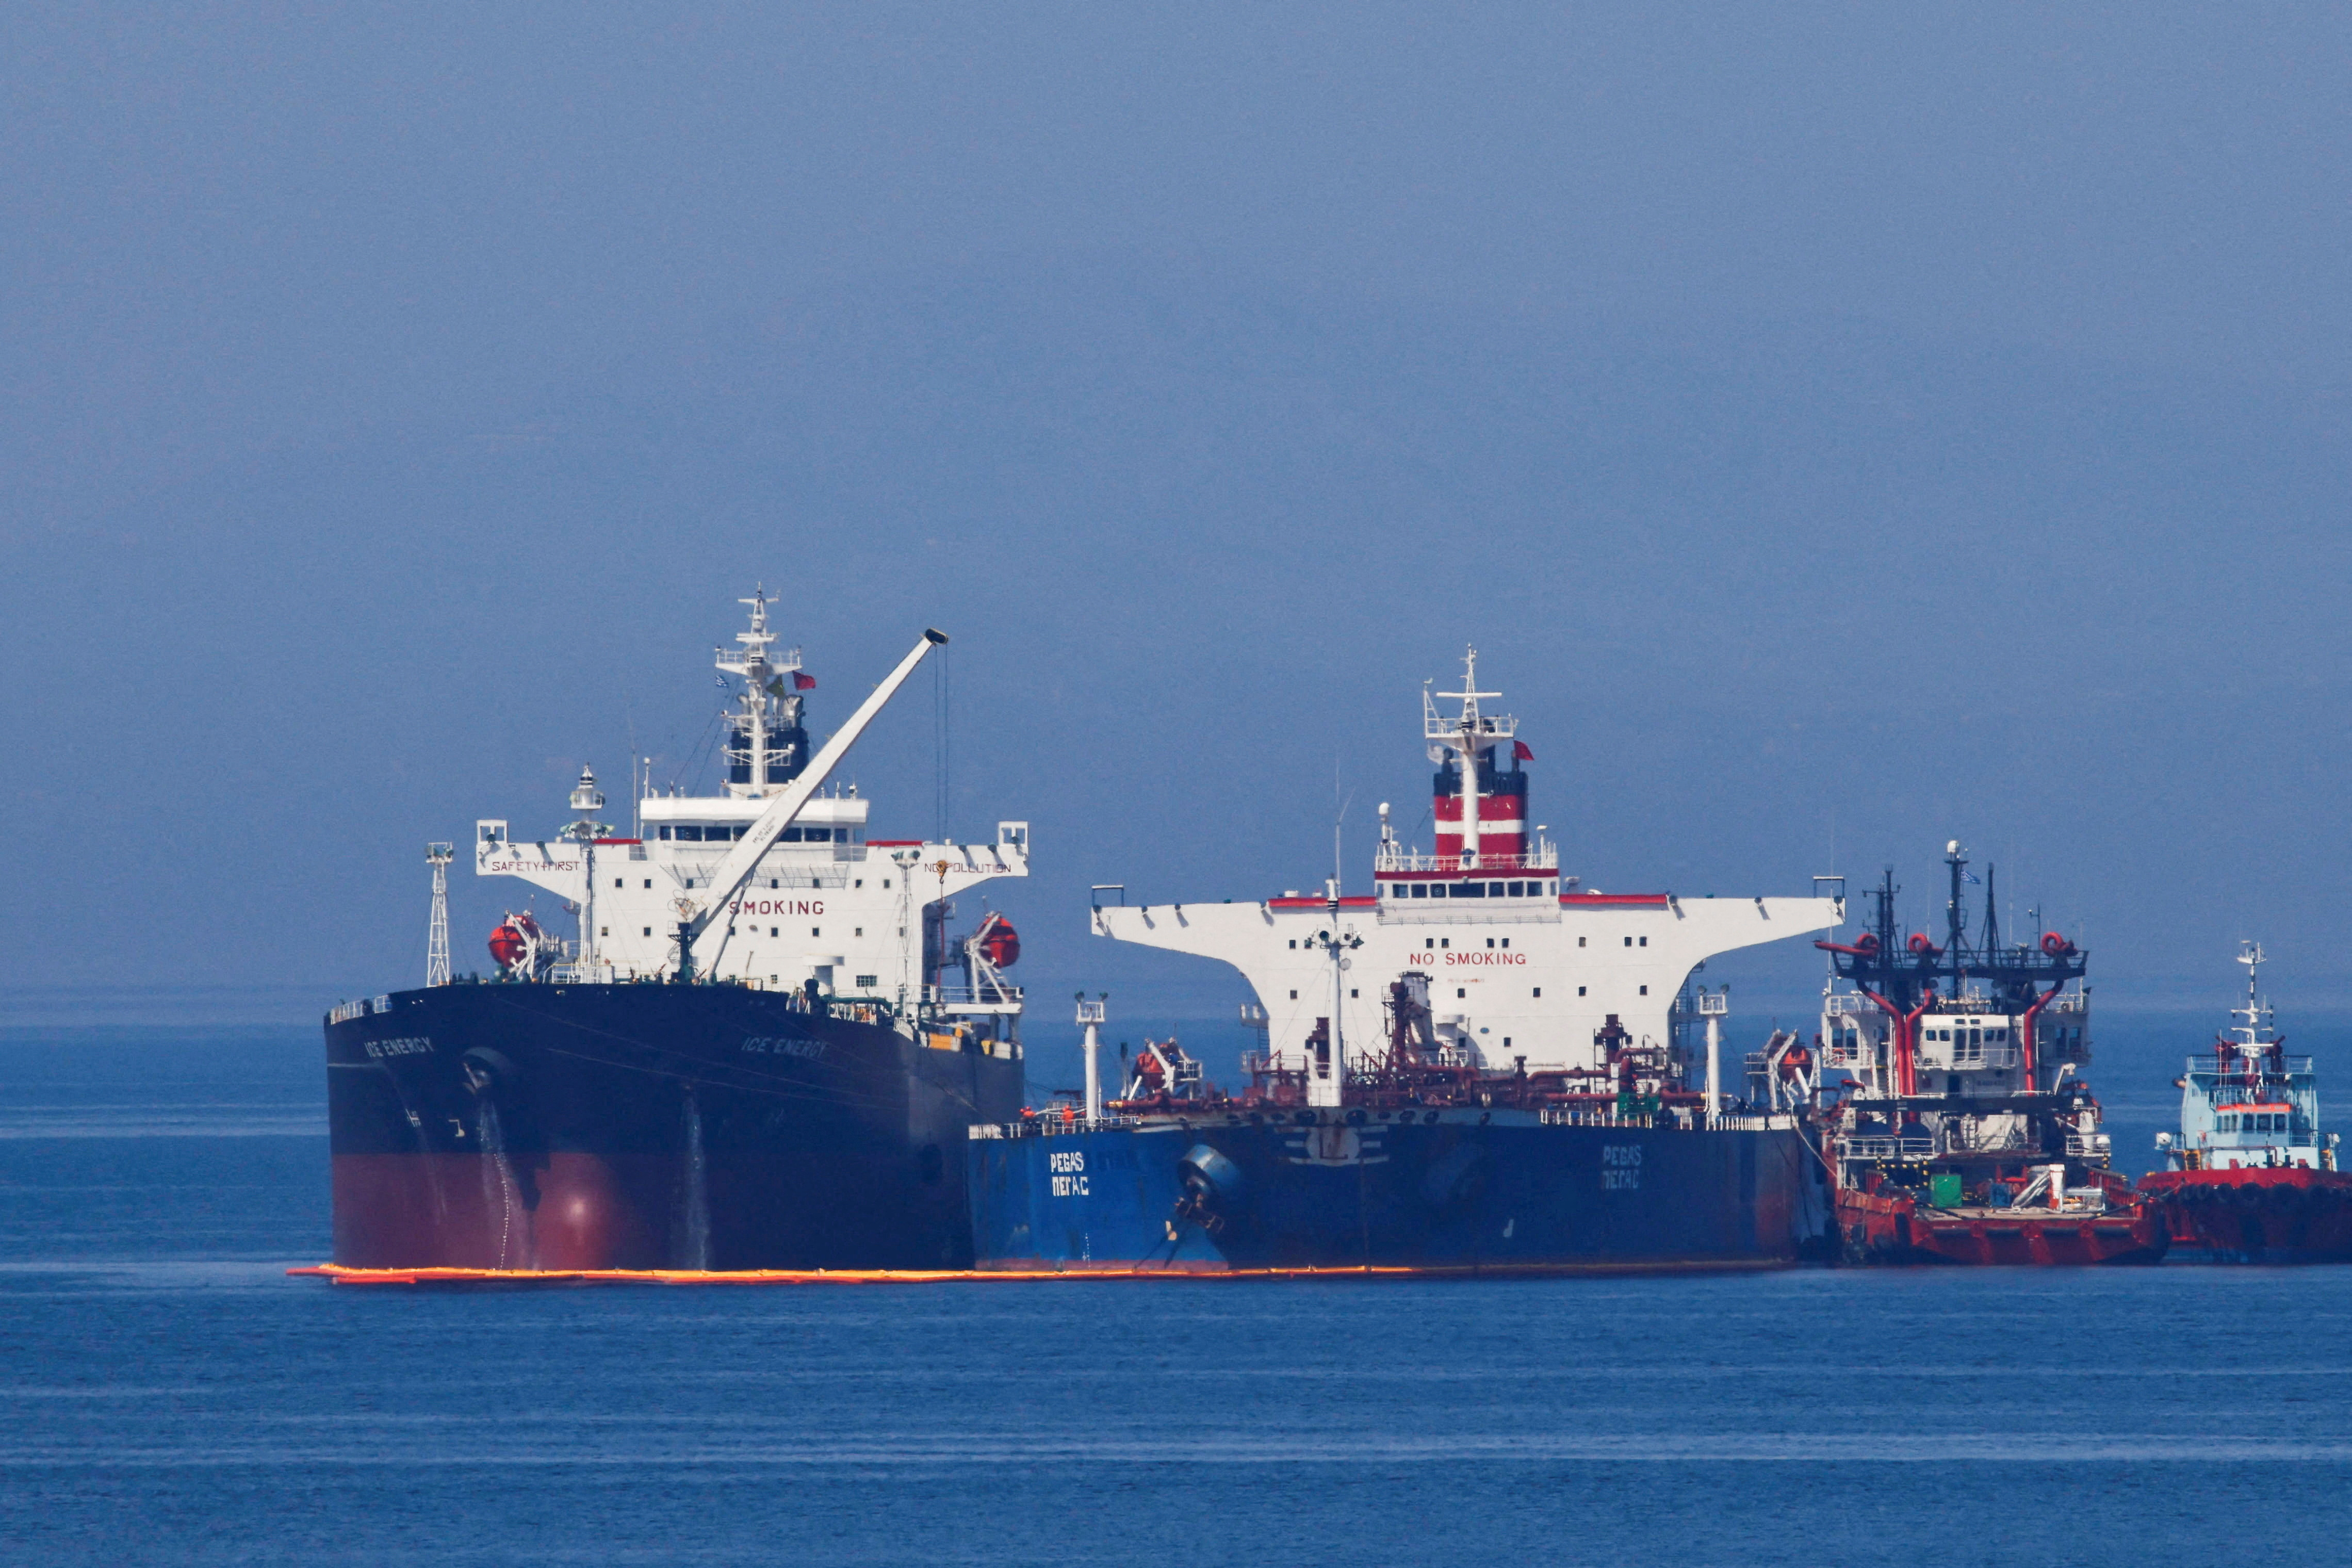 The Liberian-flagged oil tanker Ice Energy transfers crude oil from the Iranian-flagged oil tanker Lana (former Pegas) off the shore of Karystos